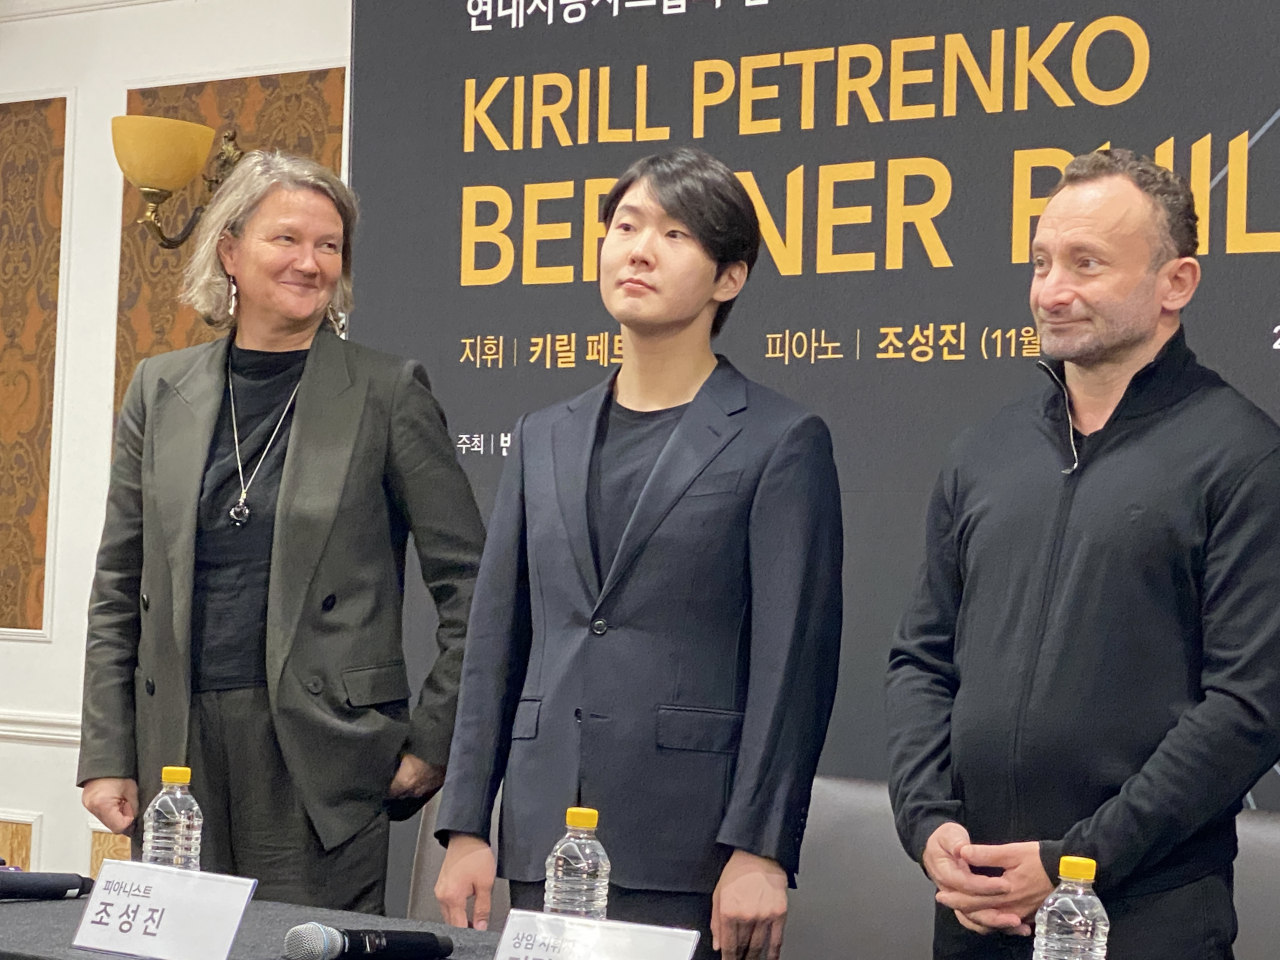 Berliner Philharmoniker general manager Andrea Zietzschmann (left), chief conductor Kirill Petrenko (right) and pianist Cho Seong-jin pose for photos during a press conference at the Seoul Arts Center, Friday. (Hwang Joo-young/The Korea Herald)